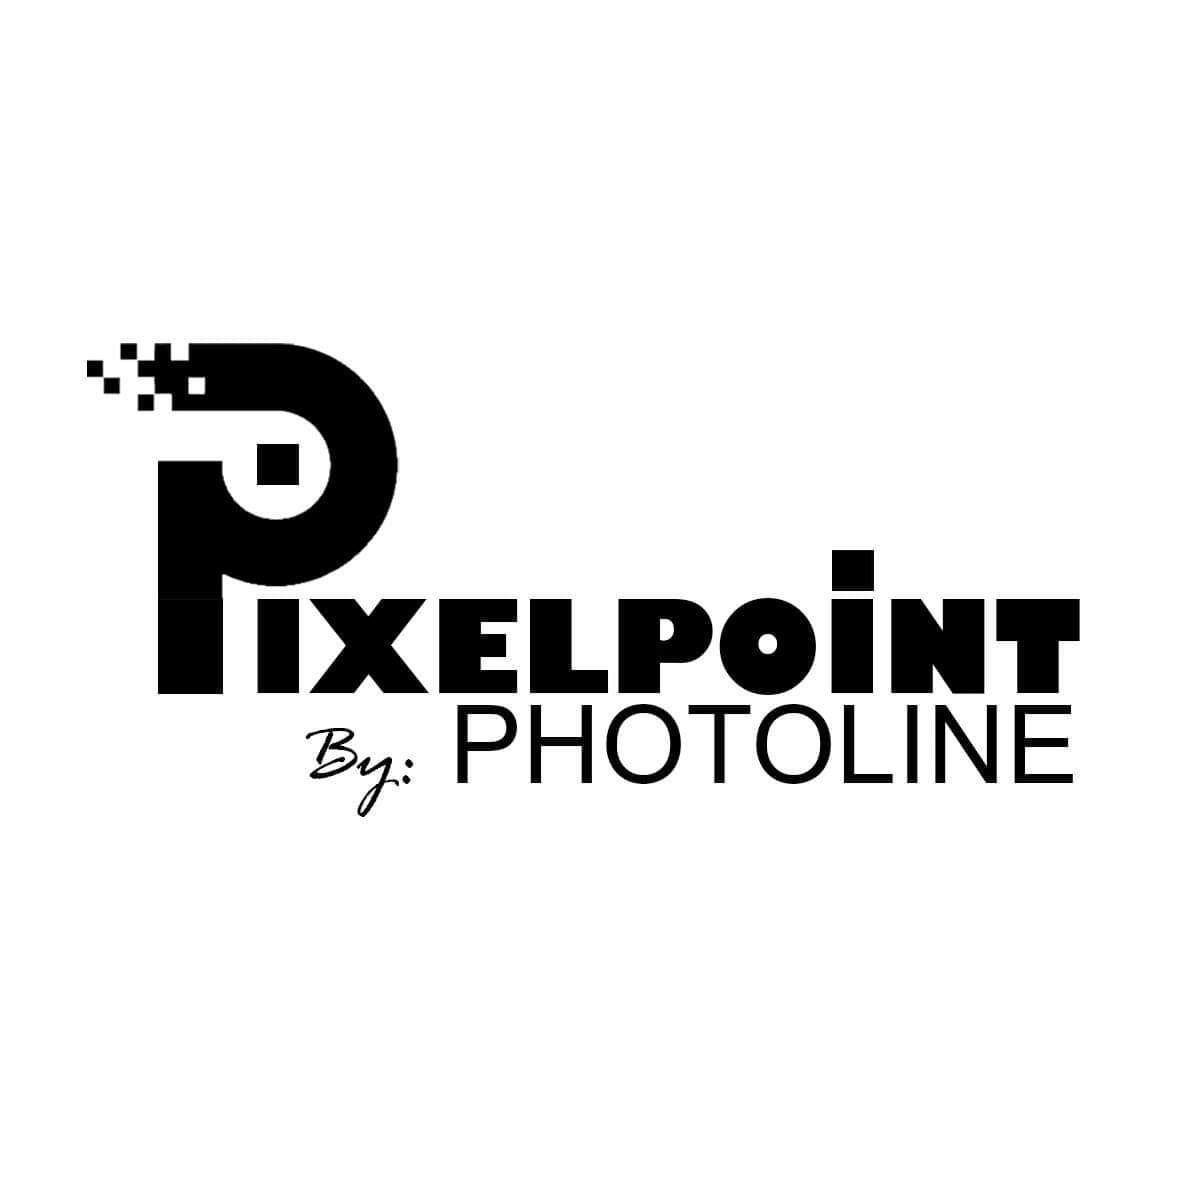 PIXEL POINT BY PHOTOLINE